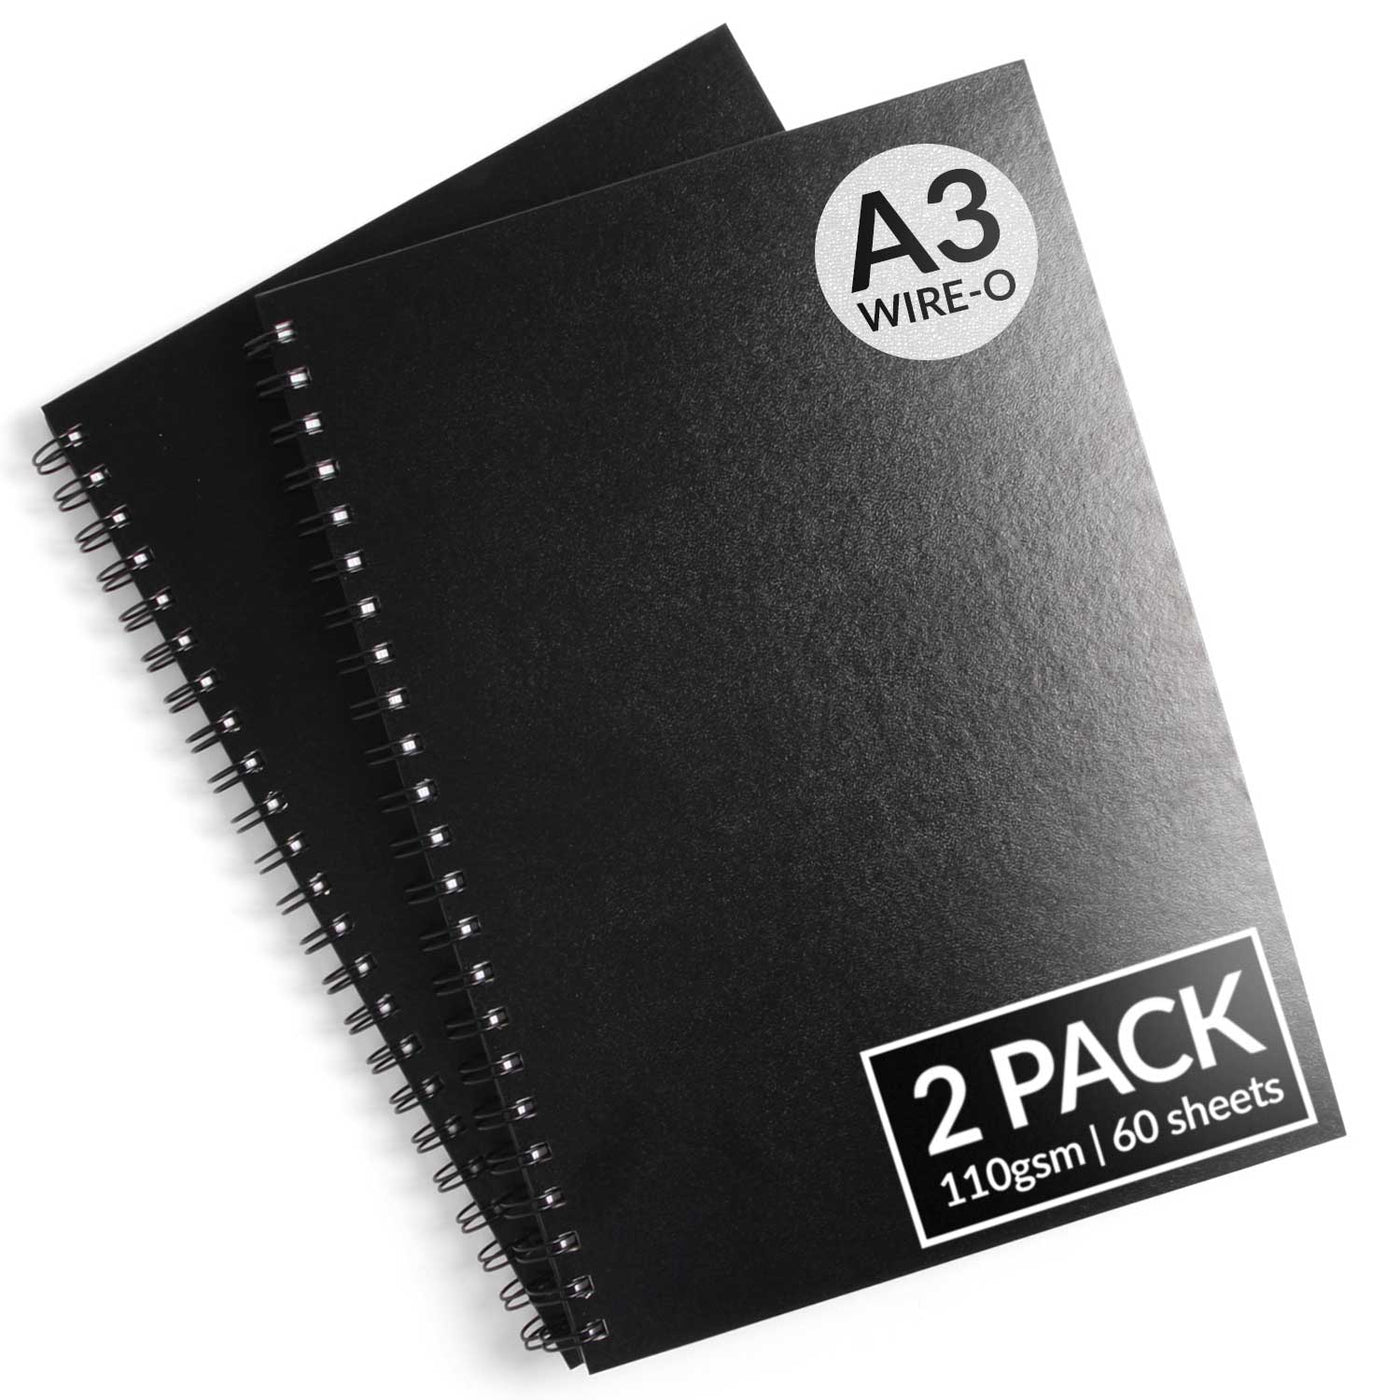 Large A4 Size Sketch Pad Spiral Bound Hardcover Blank Paper 60 Sheets